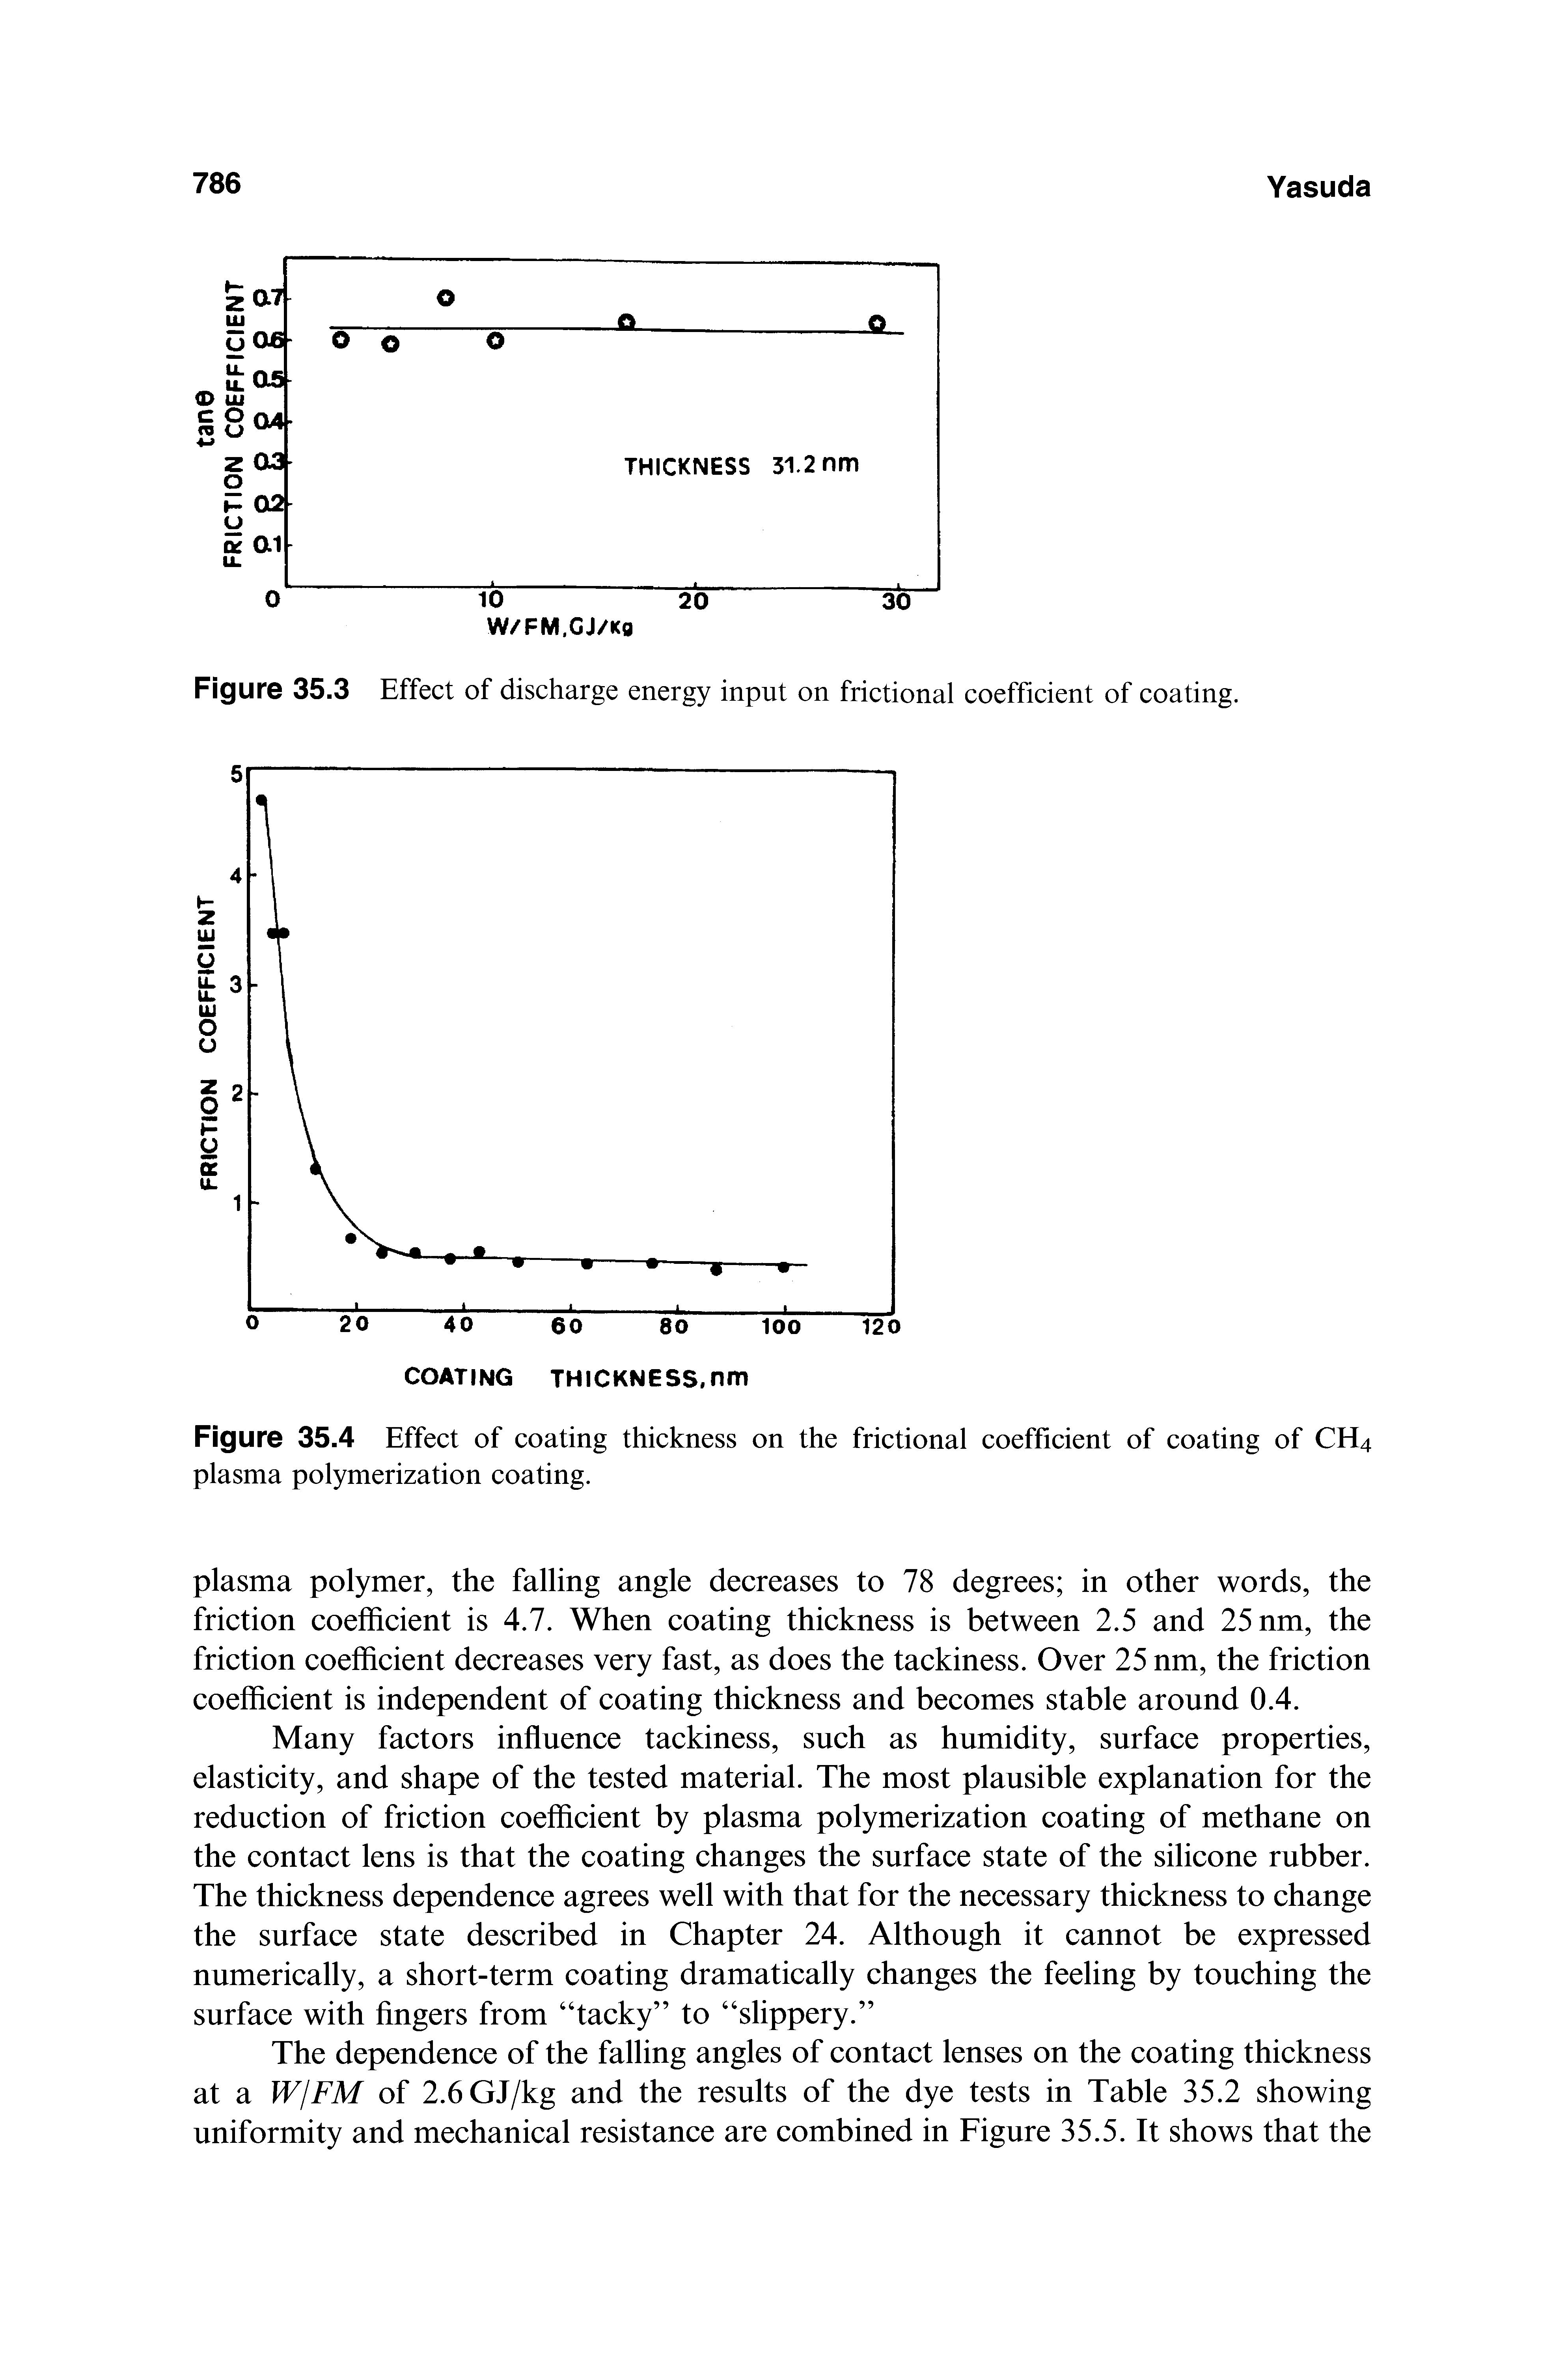 Figure 35.4 Effect of coating thickness on the frictional coefficient of coating of CH4 plasma polymerization coating.